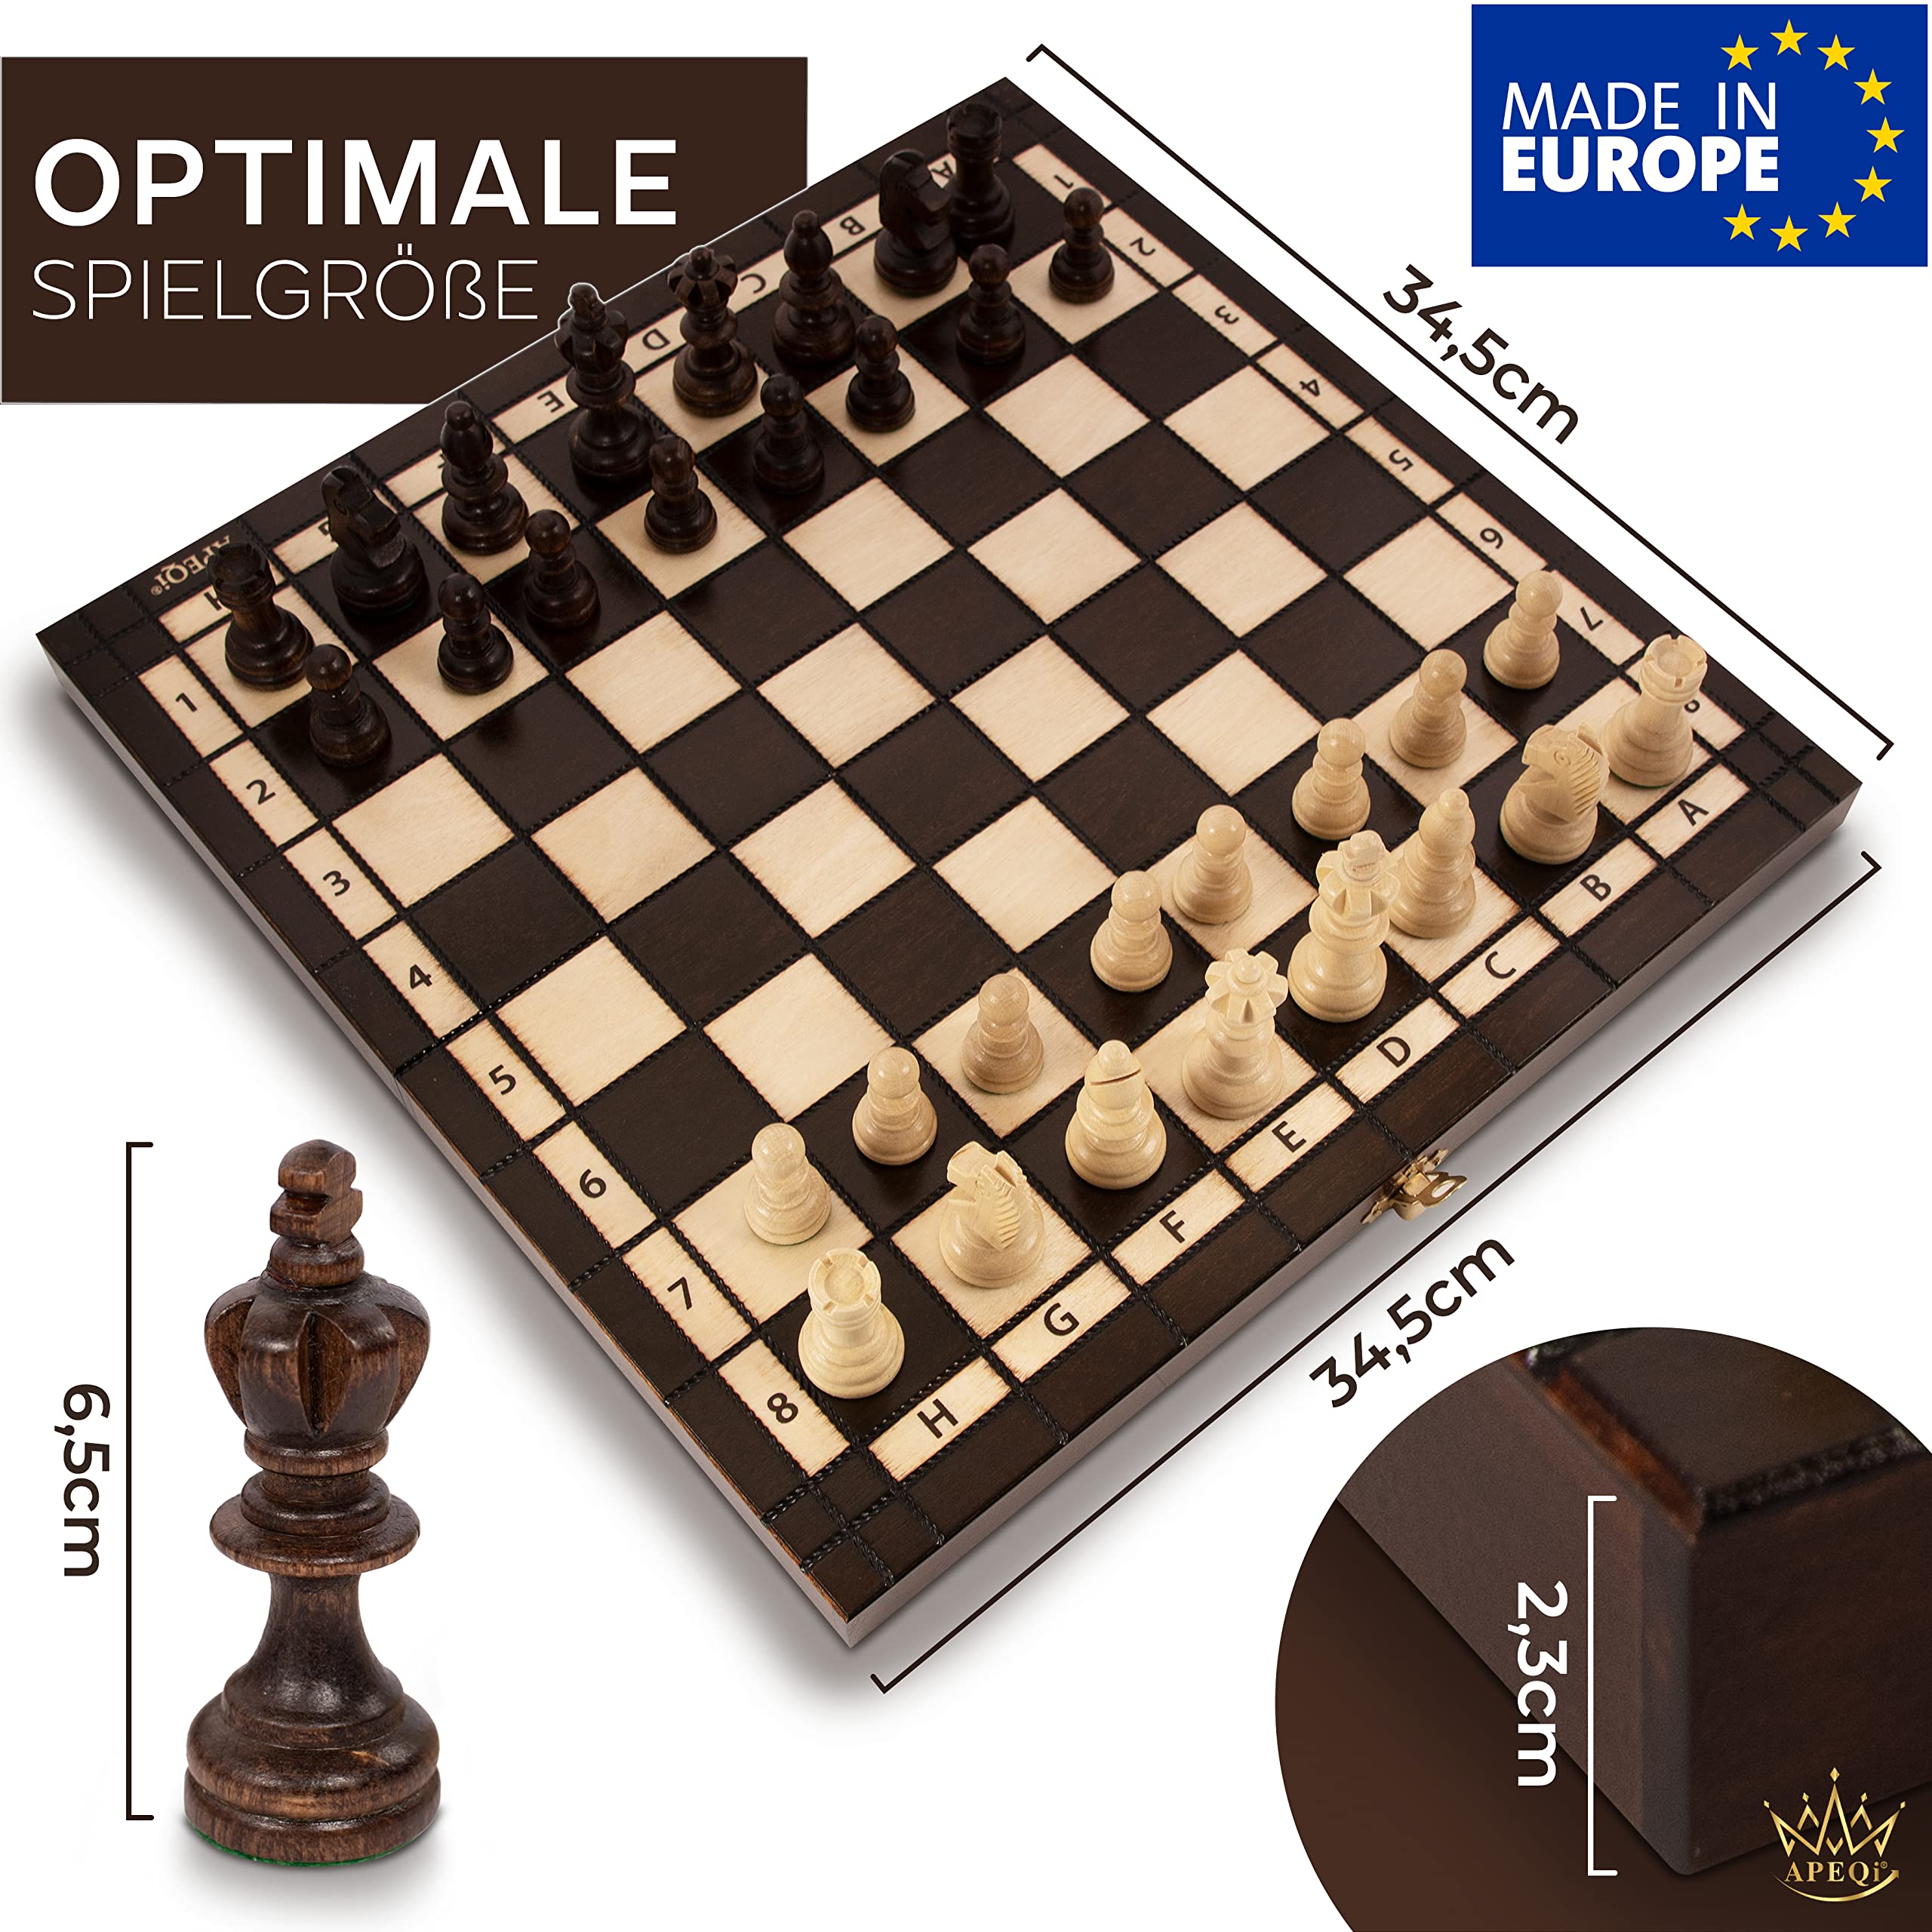 APEQi® Royal Chess Game Wood High Quality Solid Wood 34.5 x 34.5 cm from  the EU, Gift Idea Elegant Chess Board Wood High Quality Folding Chess Box